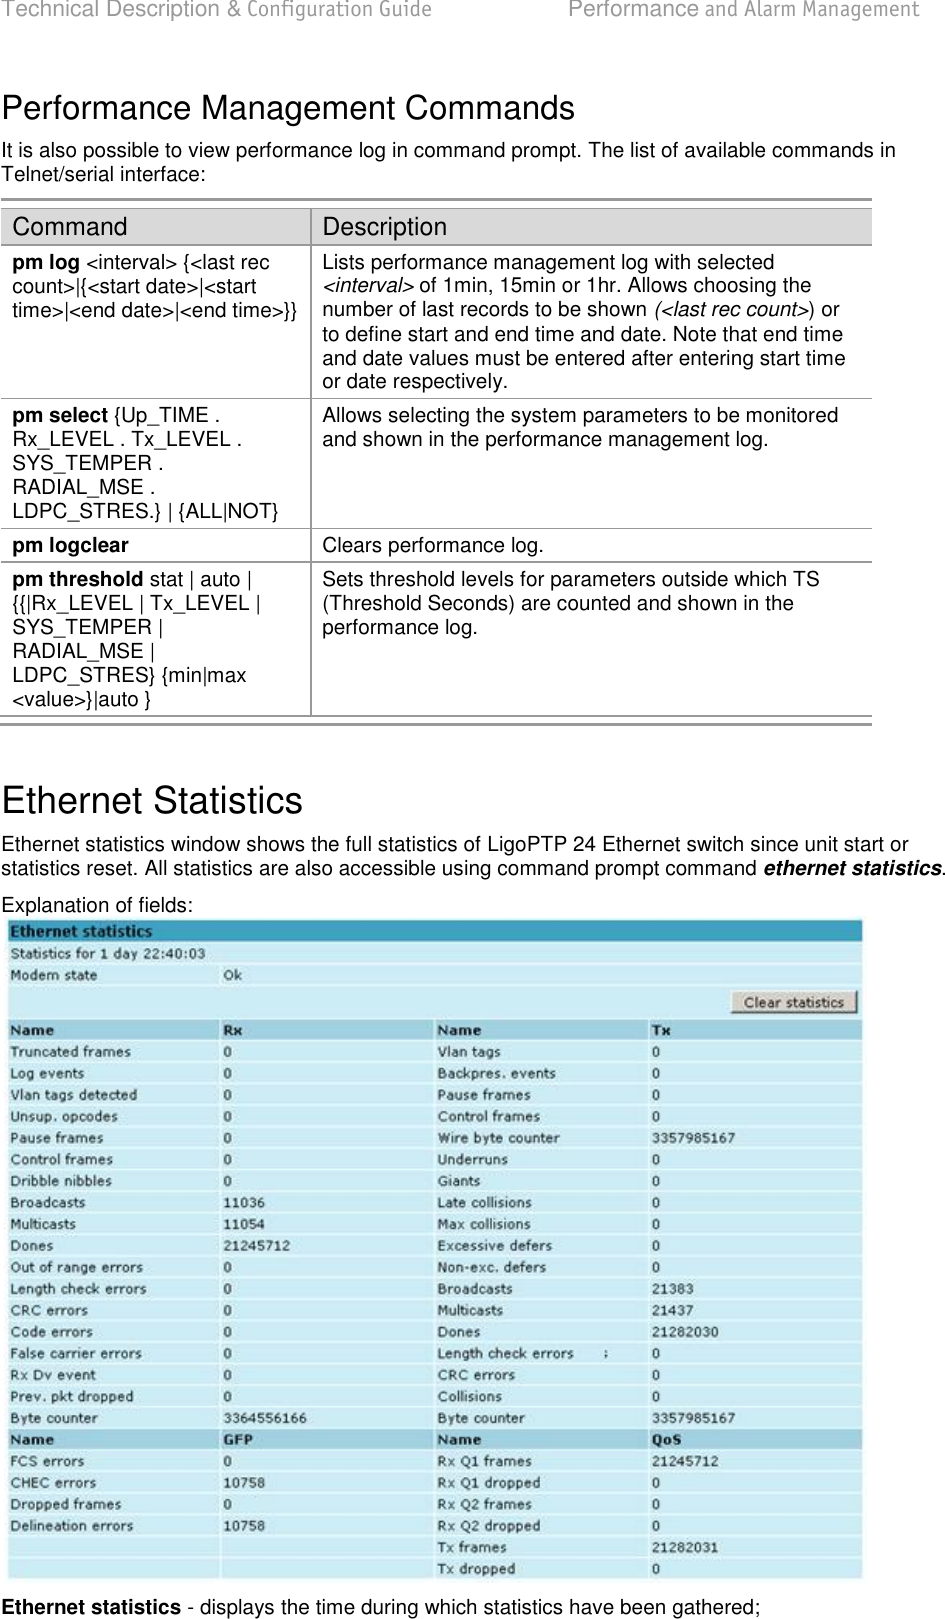 Technical Description &amp; Configuration Guide  Performance and Alarm Management  LigoWave  Page 72 Performance Management Commands It is also possible to view performance log in command prompt. The list of available commands in Telnet/serial interface: Command Description pm log &lt;interval&gt; {&lt;last rec count&gt;|{&lt;start date&gt;|&lt;start time&gt;|&lt;end date&gt;|&lt;end time&gt;}} Lists performance management log with selected &lt;interval&gt; of 1min, 15min or 1hr. Allows choosing the number of last records to be shown (&lt;last rec count&gt;) or to define start and end time and date. Note that end time and date values must be entered after entering start time or date respectively.  pm select {Up_TIME . Rx_LEVEL . Tx_LEVEL . SYS_TEMPER . RADIAL_MSE . LDPC_STRES.} | {ALL|NOT} Allows selecting the system parameters to be monitored and shown in the performance management log. pm logclear Clears performance log. pm threshold stat | auto | {{|Rx_LEVEL | Tx_LEVEL | SYS_TEMPER | RADIAL_MSE | LDPC_STRES} {min|max &lt;value&gt;}|auto } Sets threshold levels for parameters outside which TS (Threshold Seconds) are counted and shown in the performance log.  Ethernet Statistics Ethernet statistics window shows the full statistics of LigoPTP 24 Ethernet switch since unit start or statistics reset. All statistics are also accessible using command prompt command ethernet statistics. Explanation of fields:  Ethernet statistics - displays the time during which statistics have been gathered; 